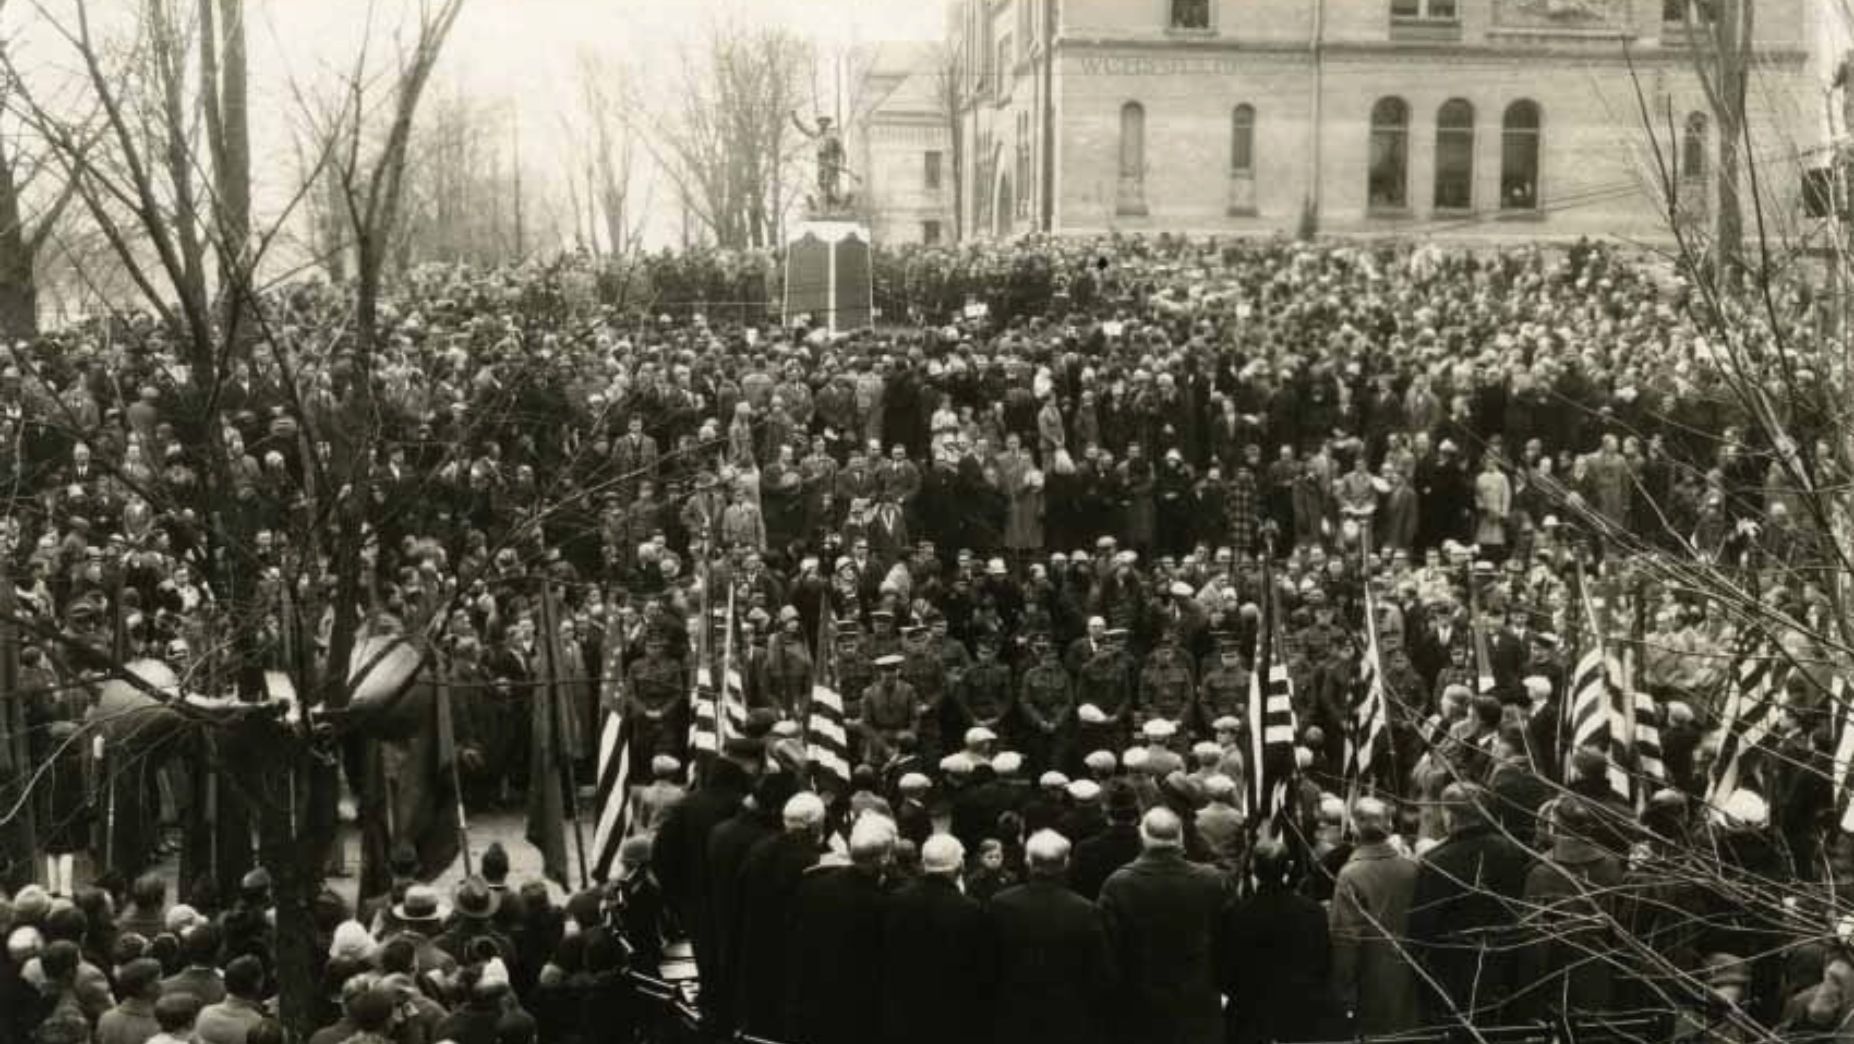 Crowds at the dedication ceremony of the Doughboy Statue in Washington County, Wisconsin